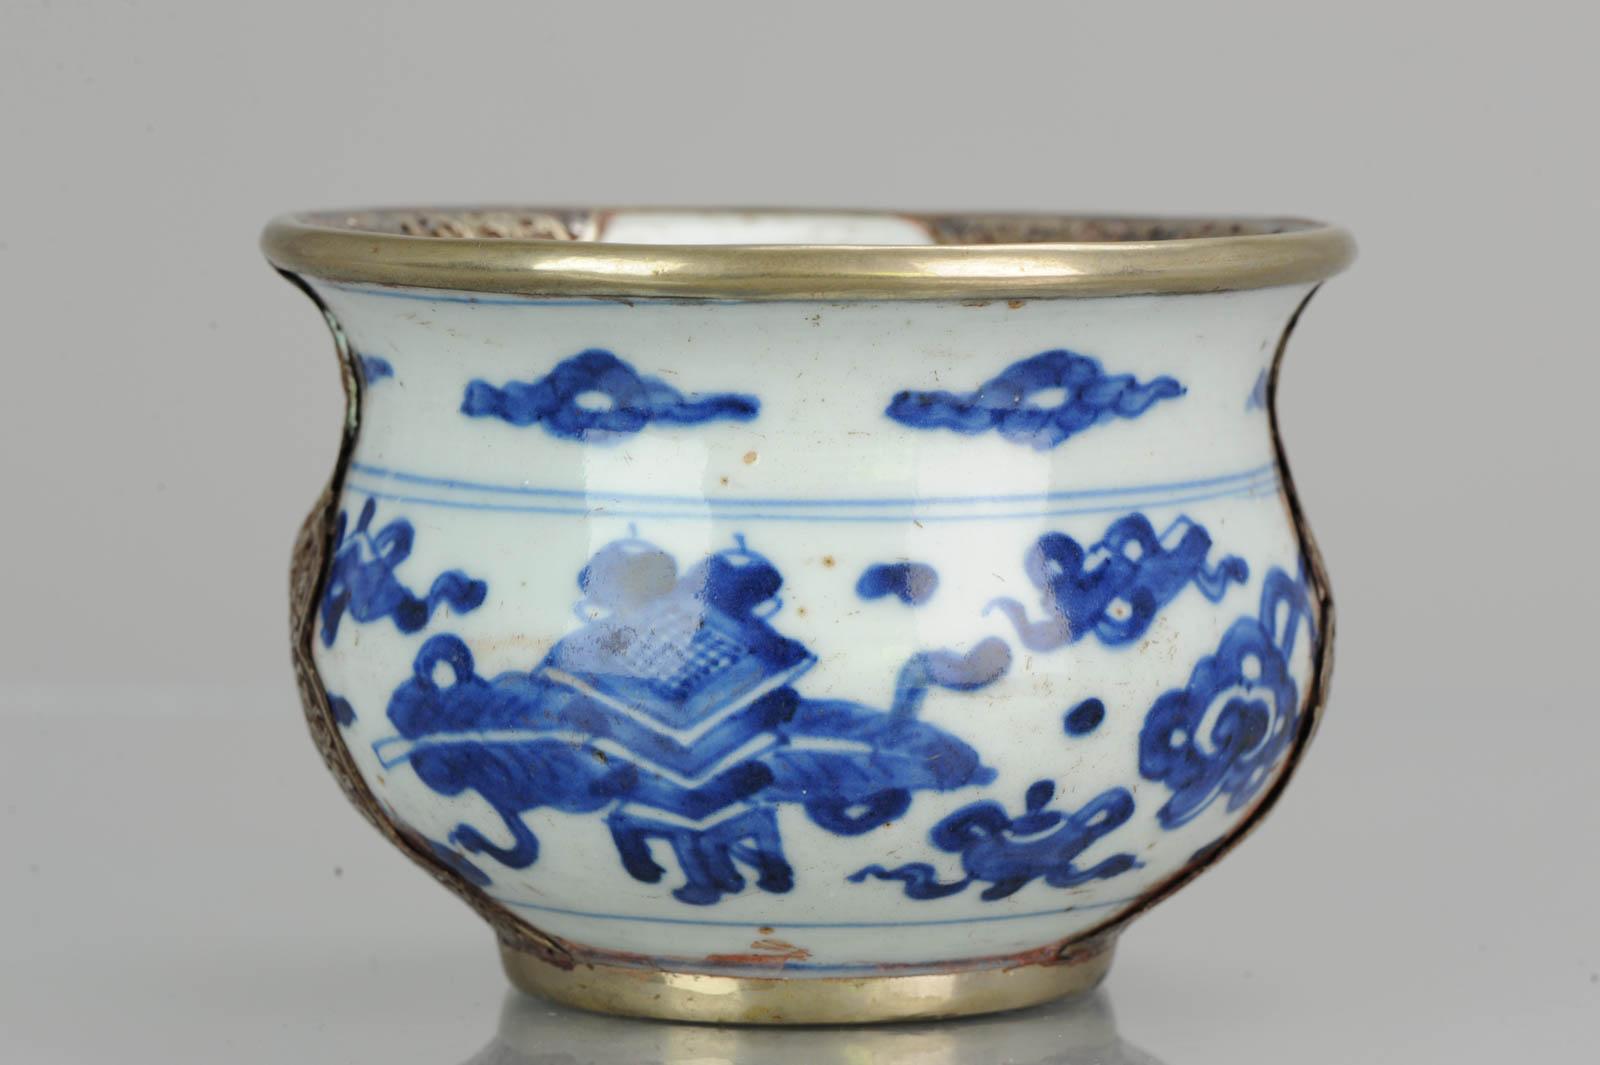  Rare 17th C Transitional Early Kangxi Chinese Porcelain China Bowl Flowers For Sale 6